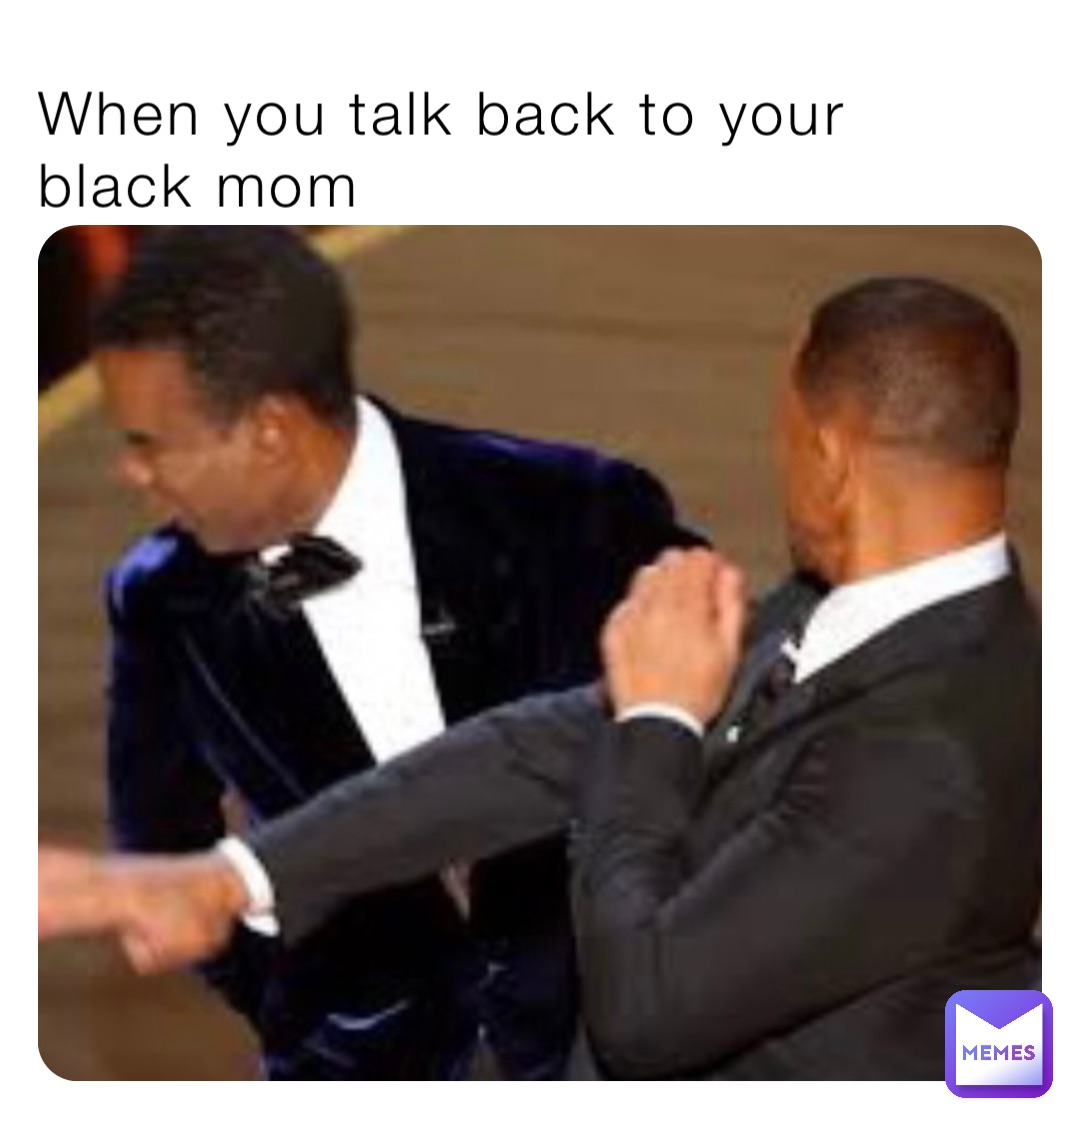 When you talk back to your black mom